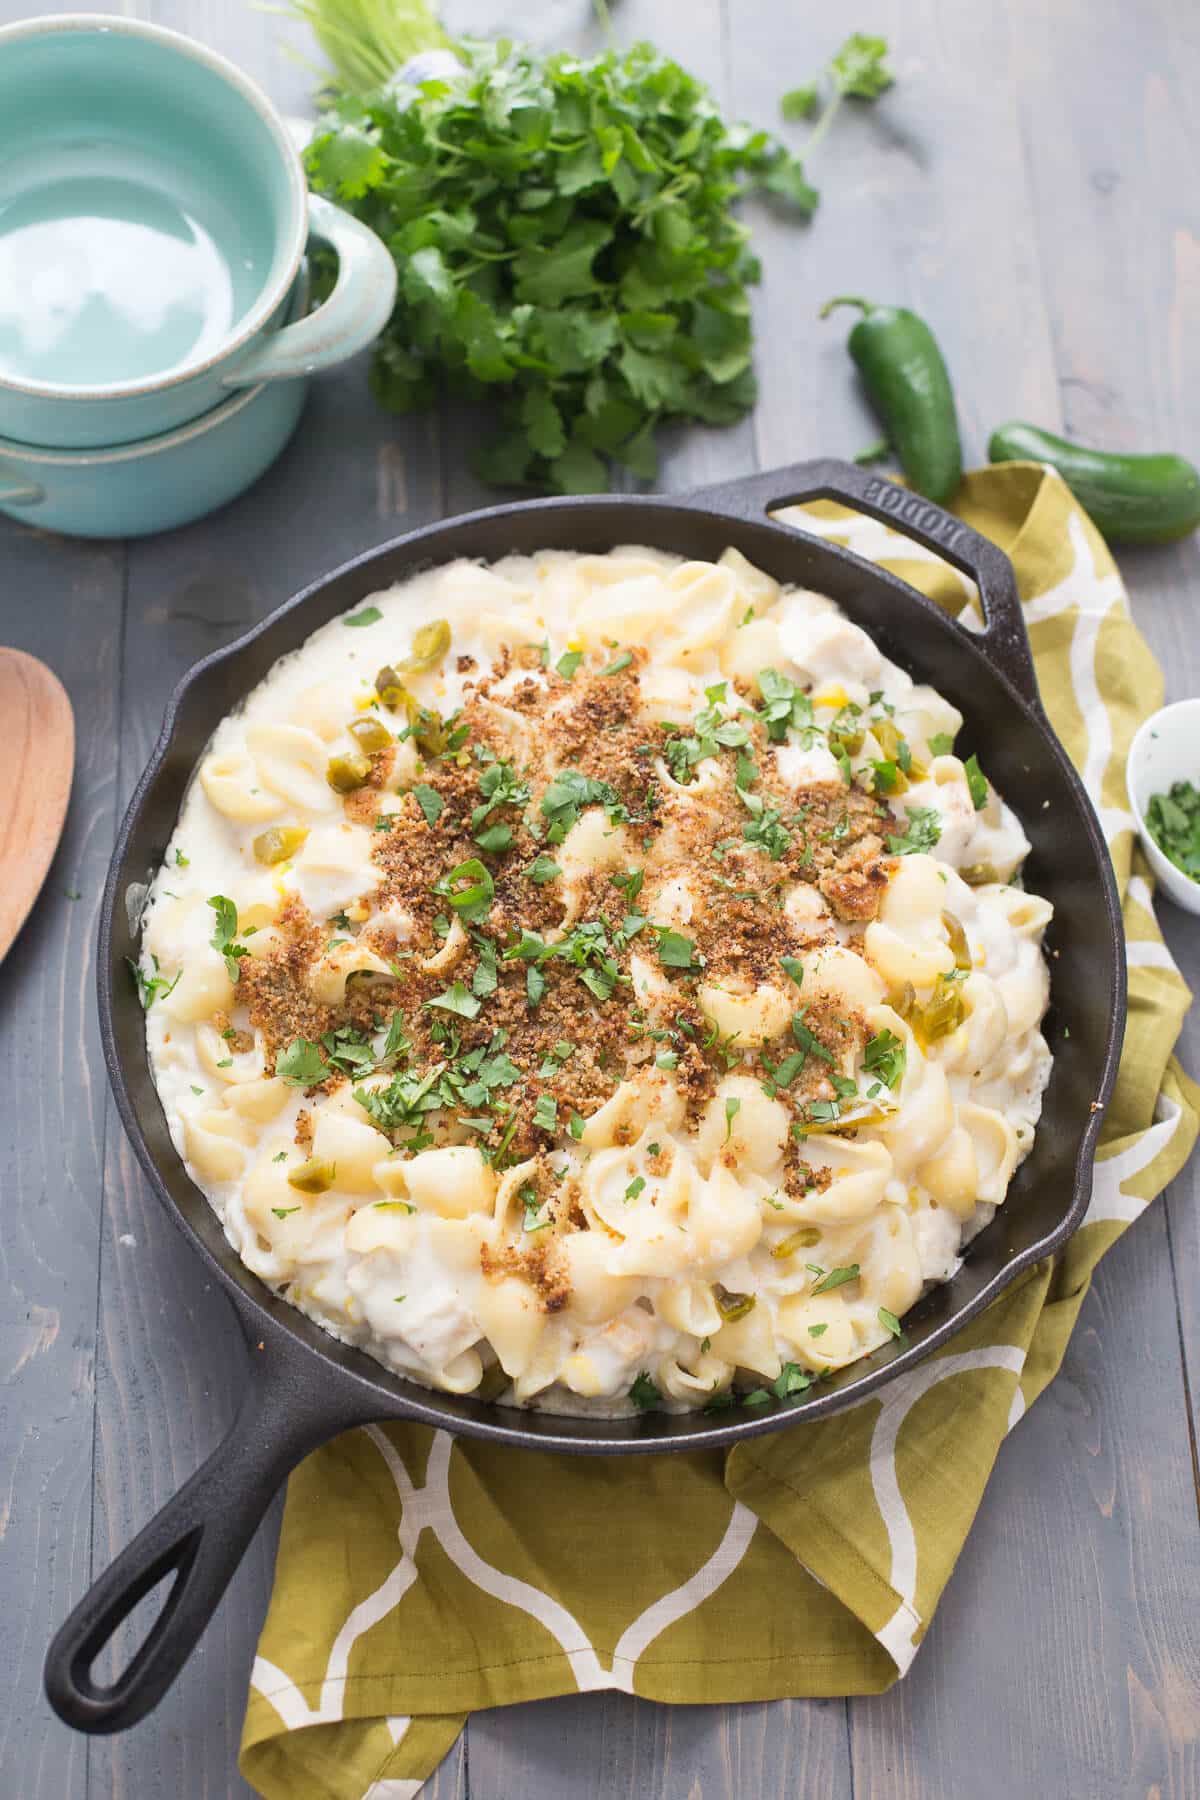 This Mexican mac and cheese is filled with ultra creamy goodness!